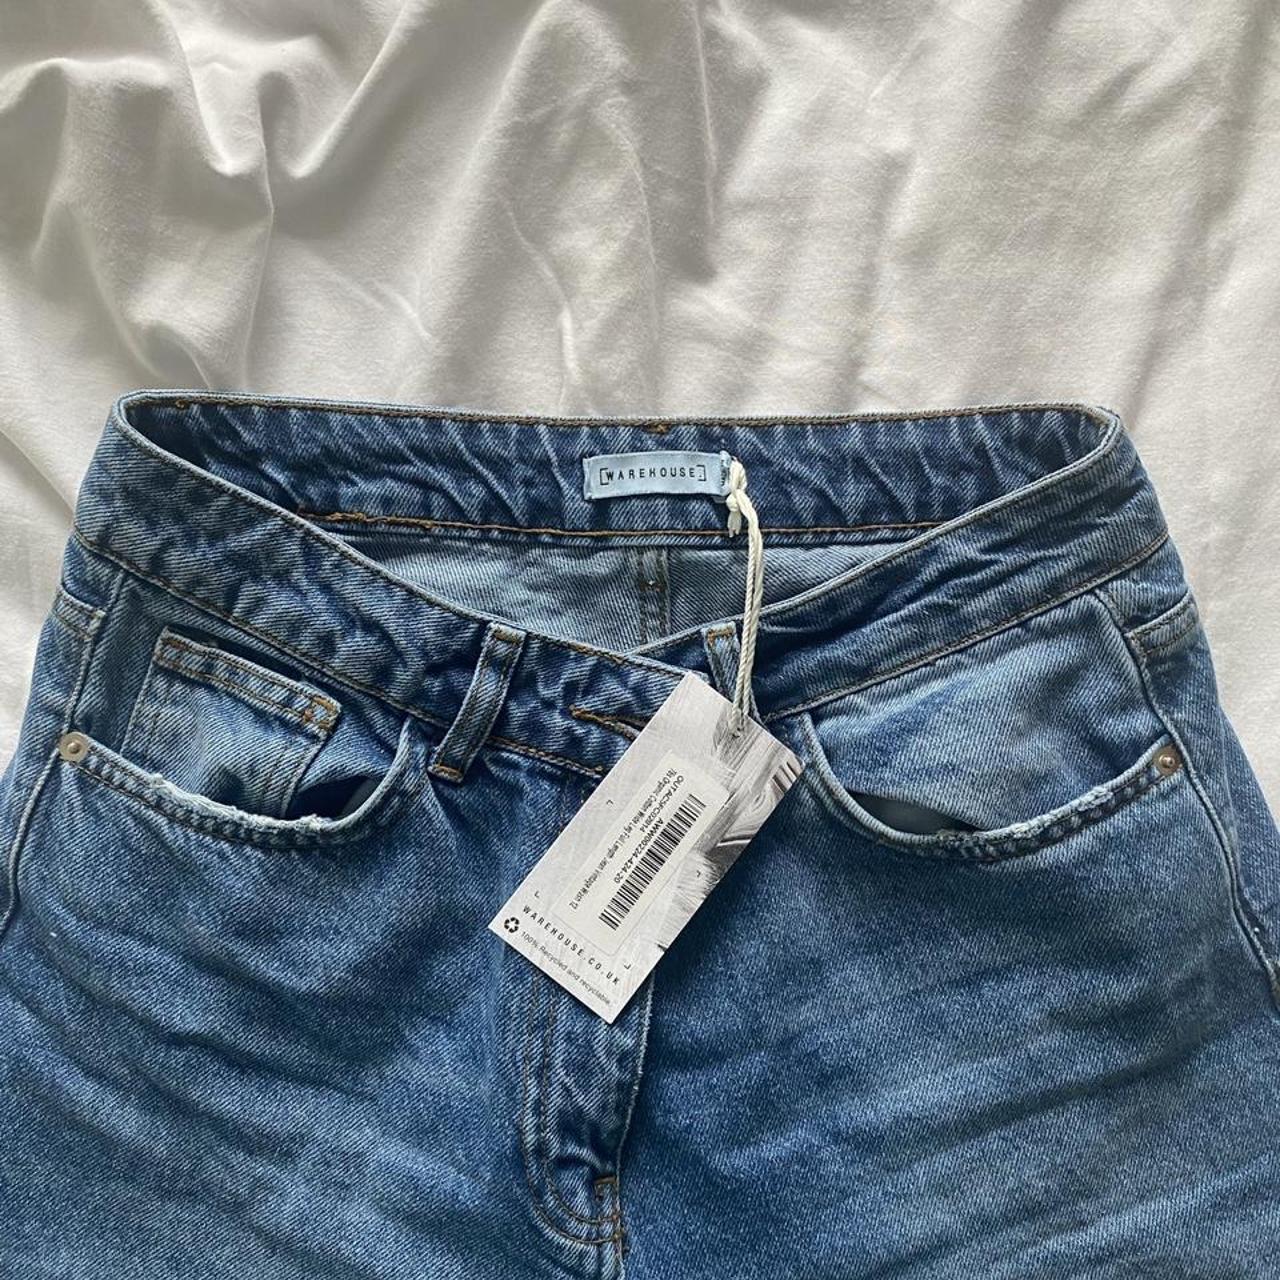 Warehouse jeans Brand new only been worn for pic... - Depop